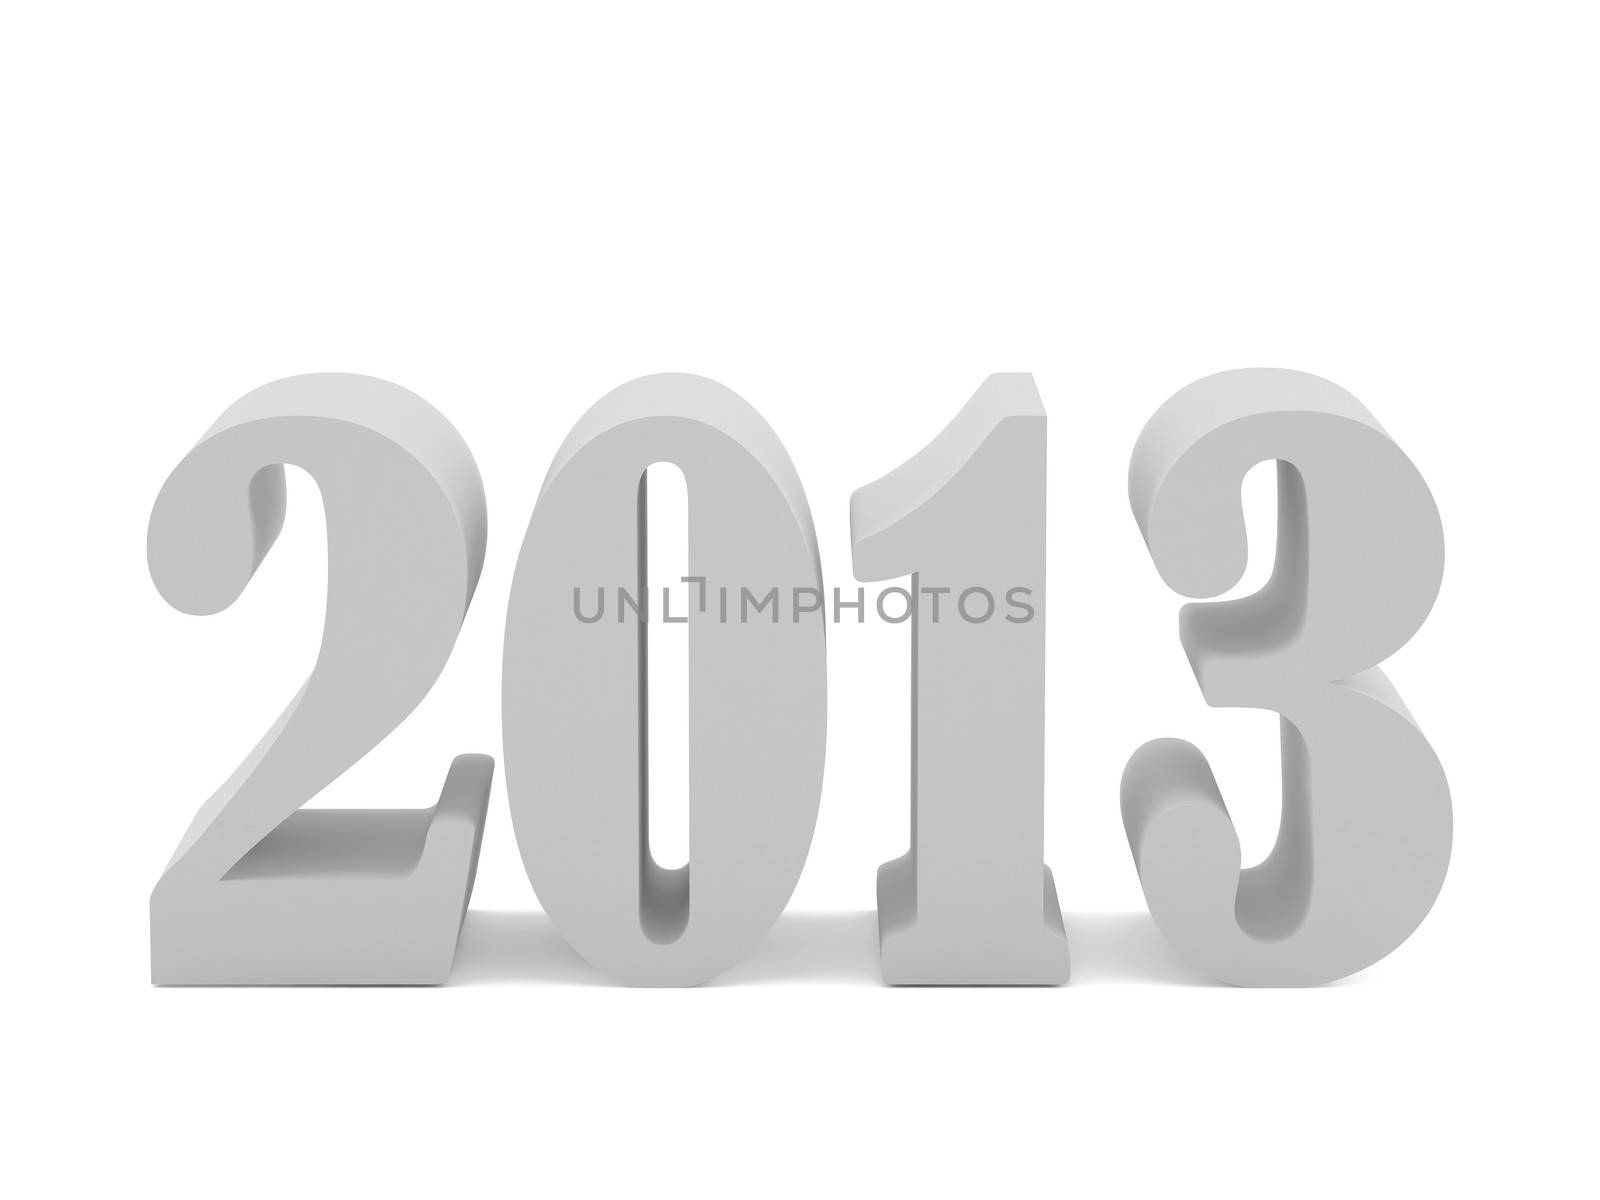 New 2013 year card. High resolution image.  3d rendered illustration.